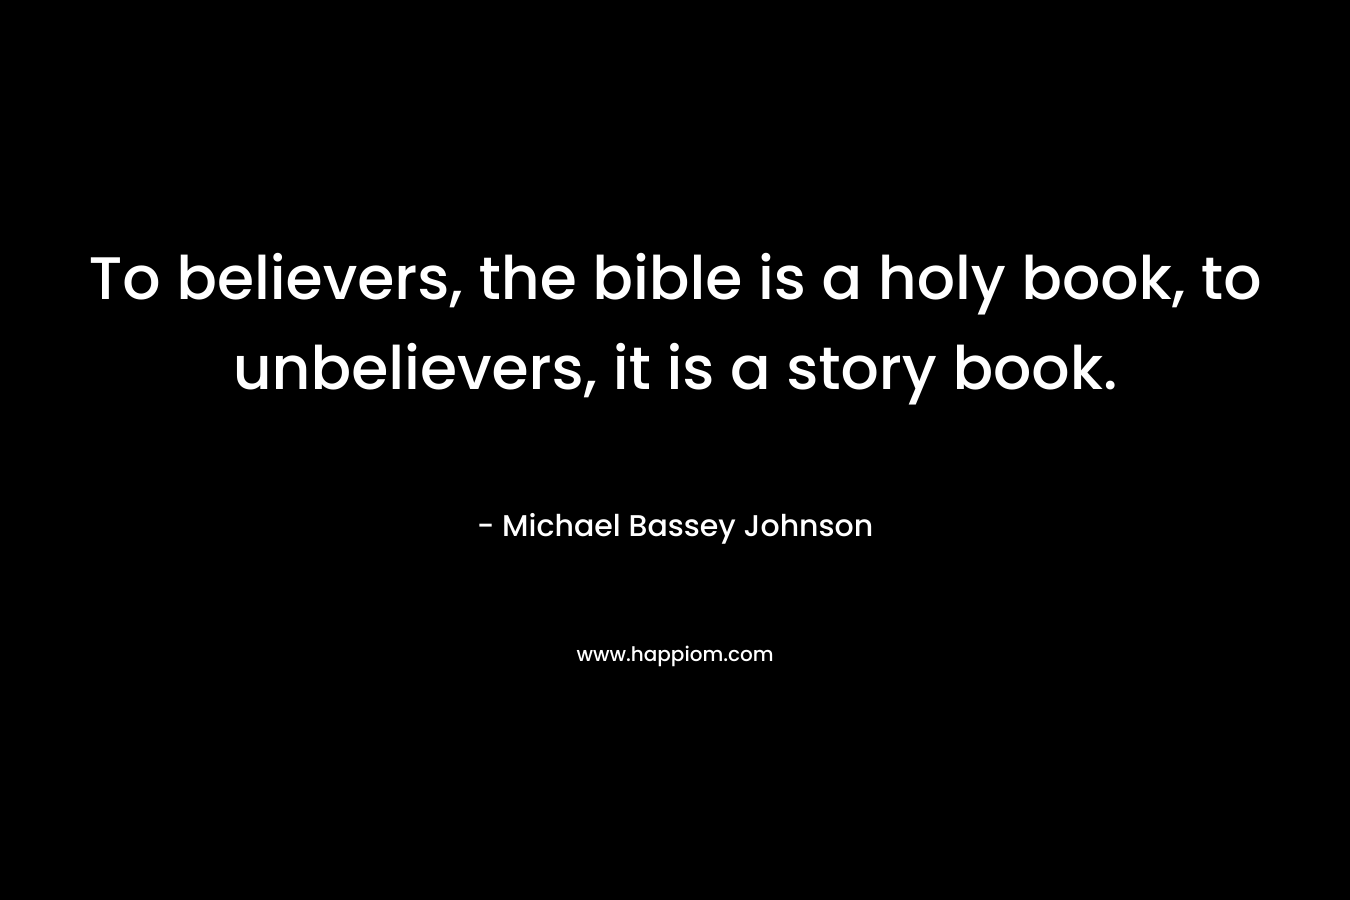 To believers, the bible is a holy book, to unbelievers, it is a story book.